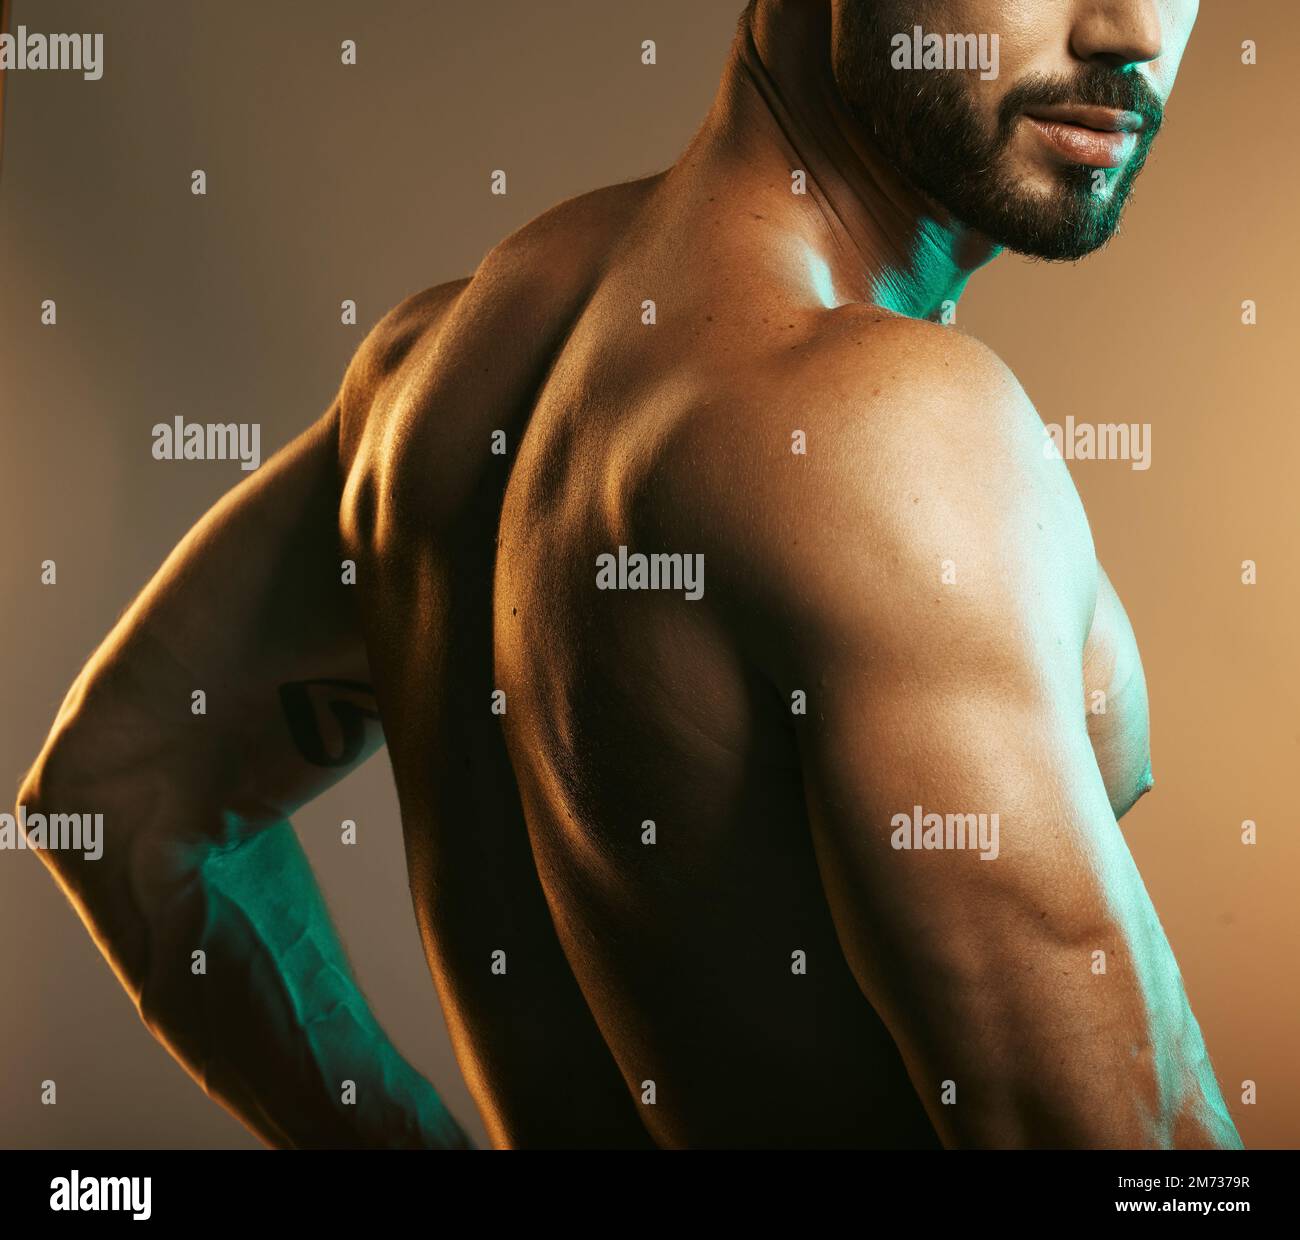 Man, body or back muscles on studio background with creative light aesthetic, training goals or workout progress. Zoom, skin or bodybuilder fitness Stock Photo